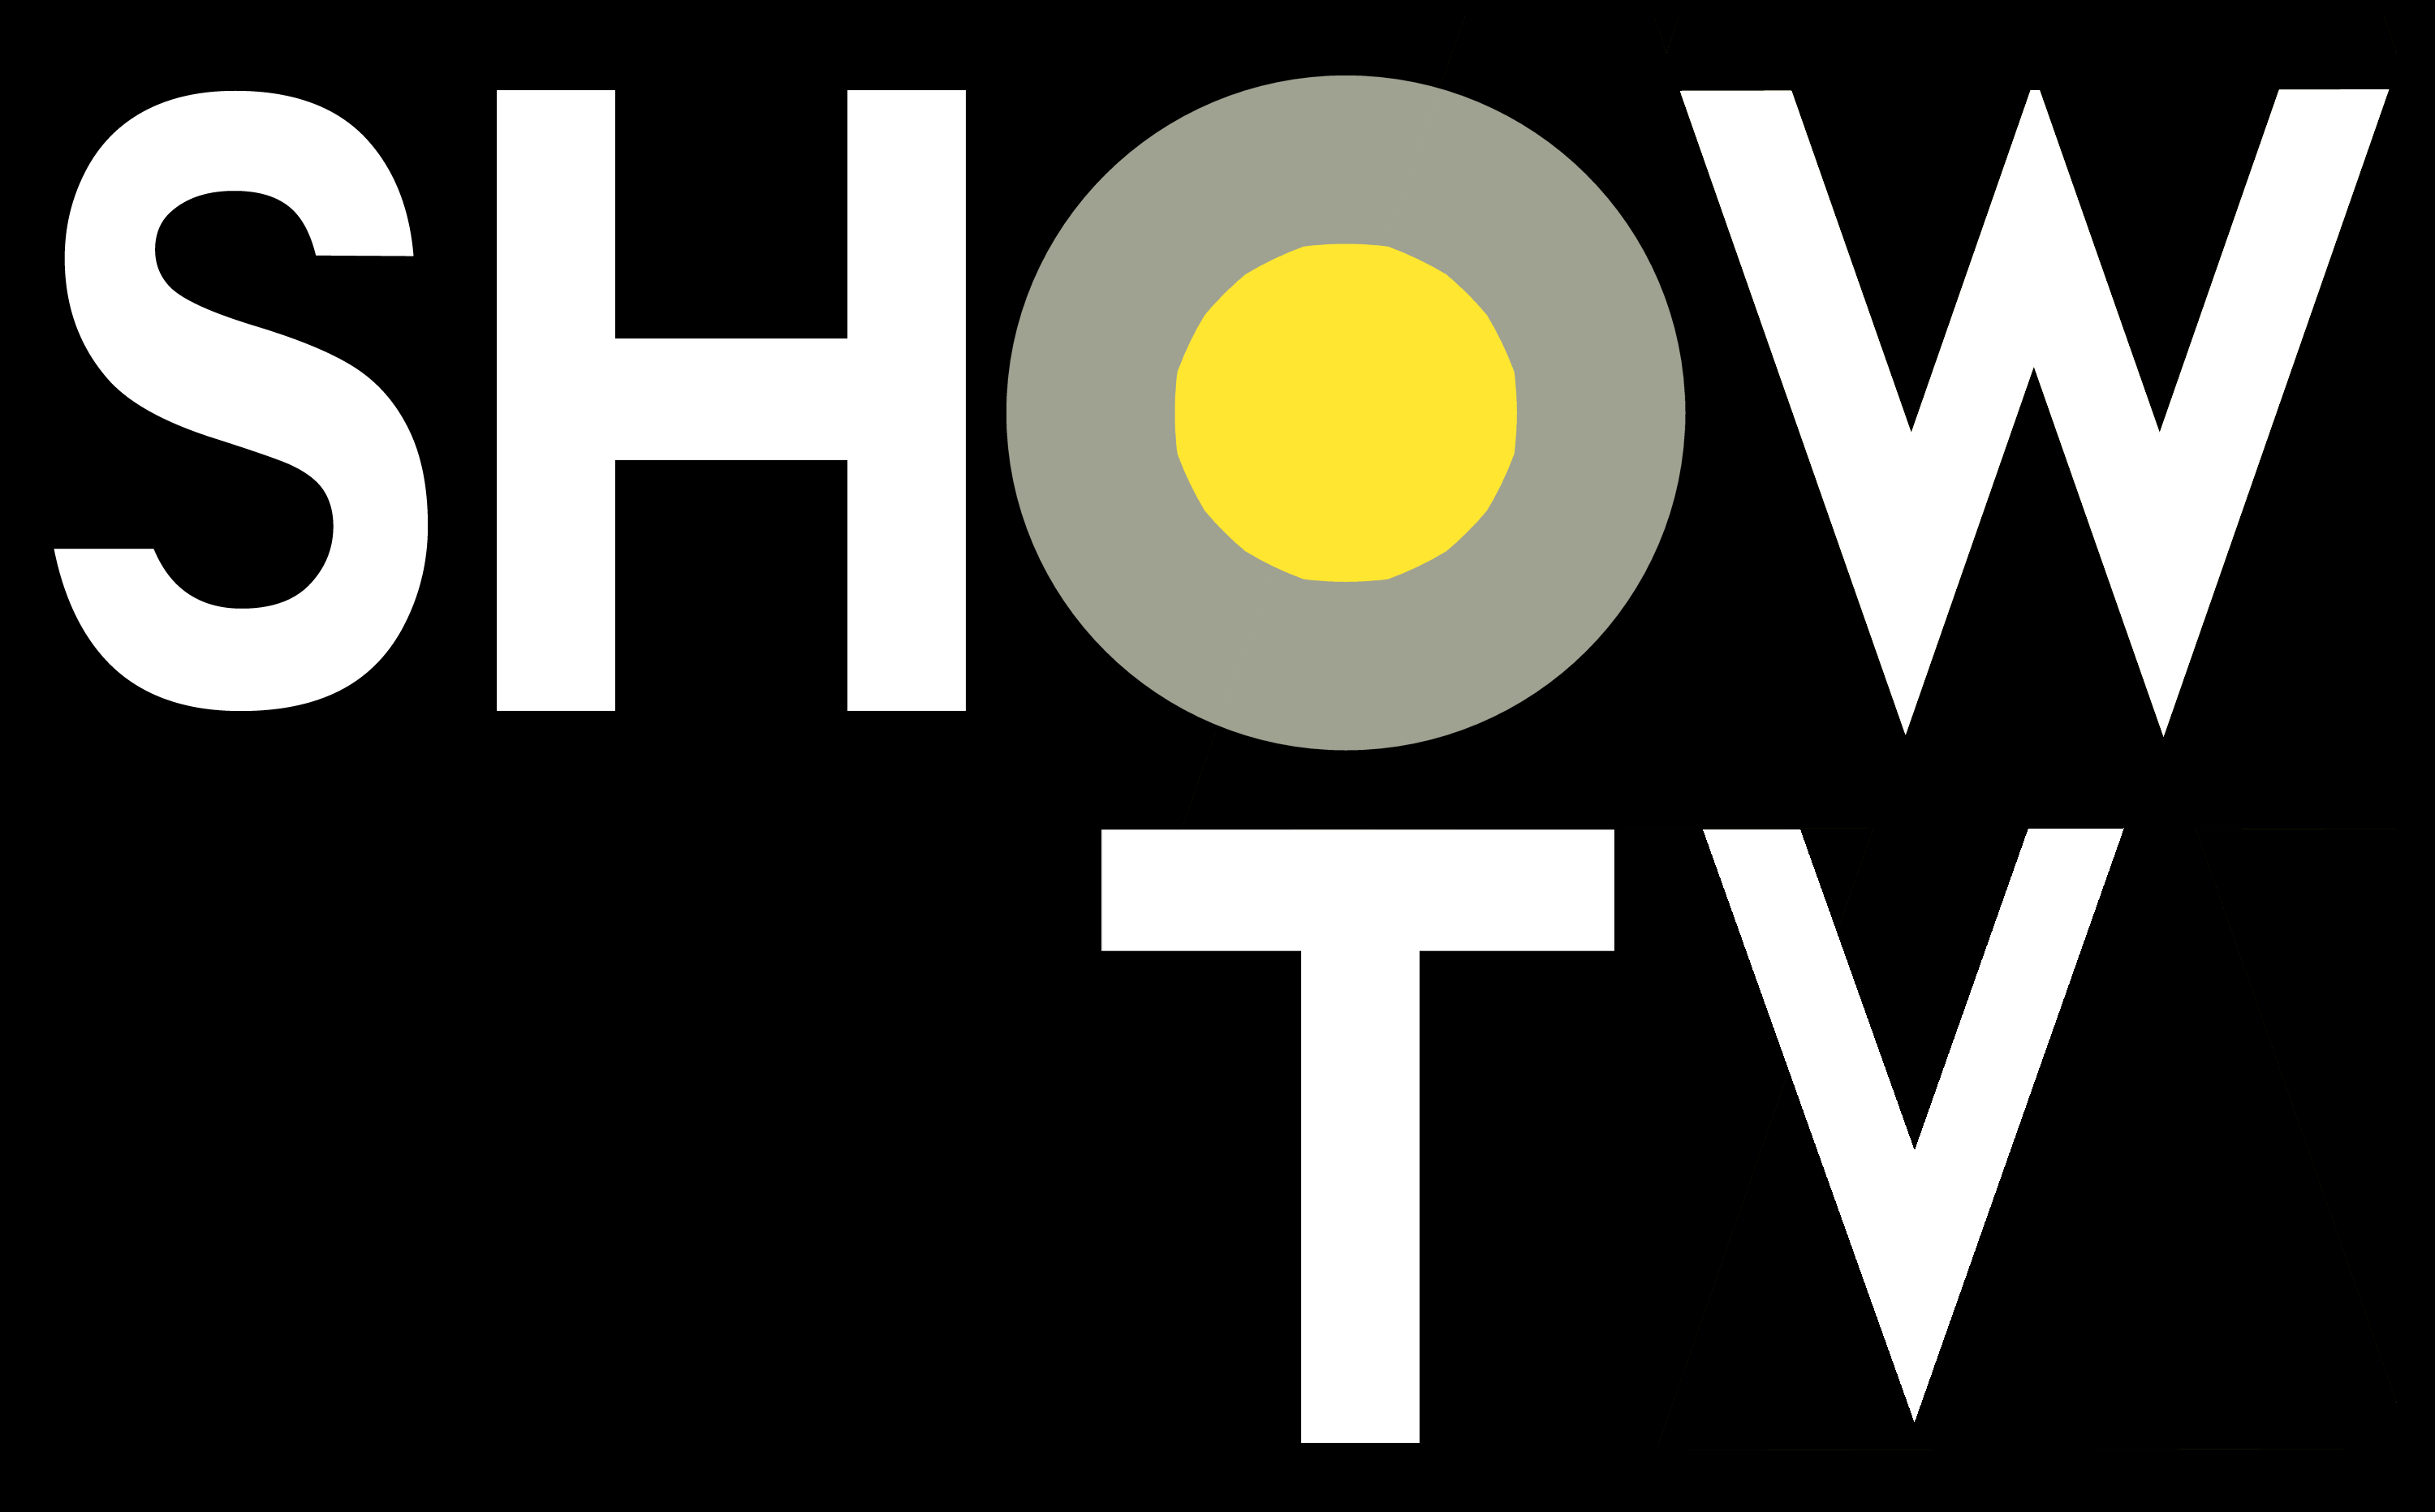 Show Logo - File:Former logo of Show TV.png - Wikimedia Commons